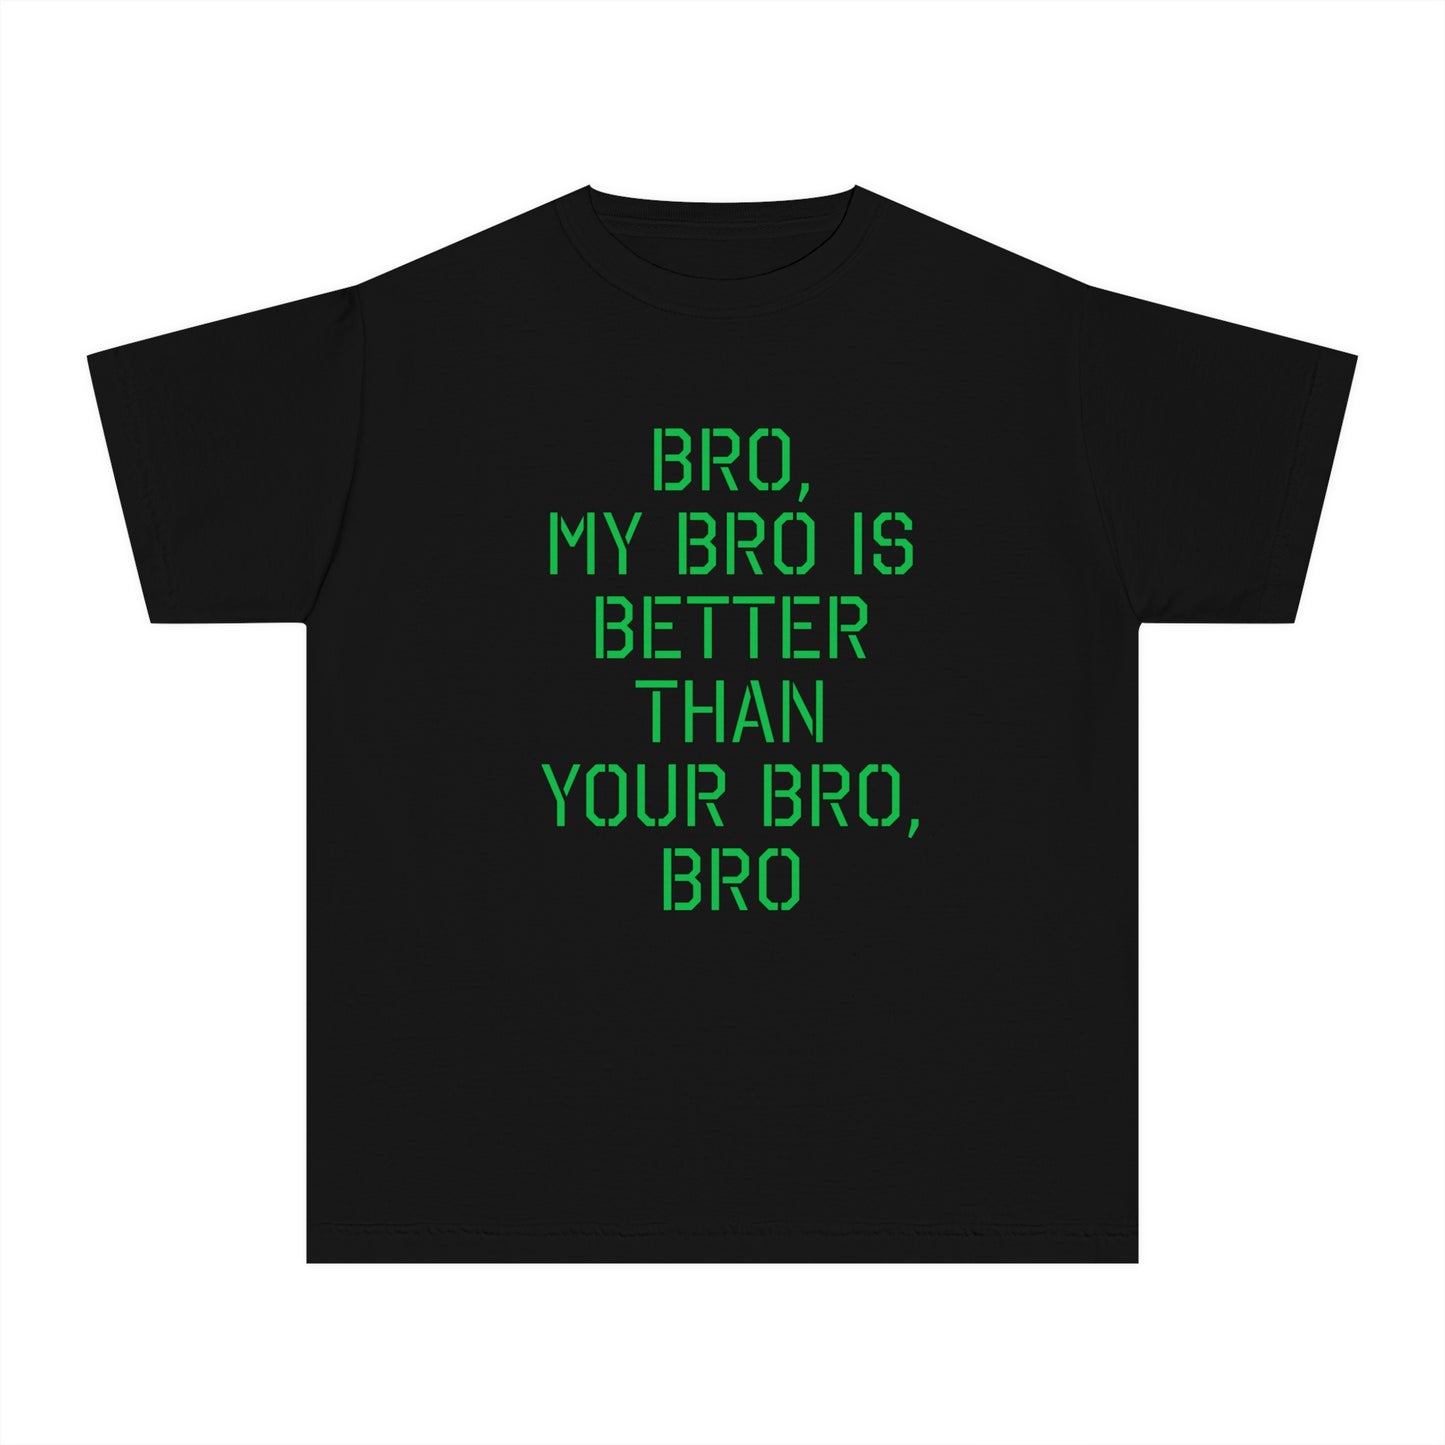 BRO, MY BRO IS BETTER THAN YOUR BRO, BRO-Youth Midweight Tee